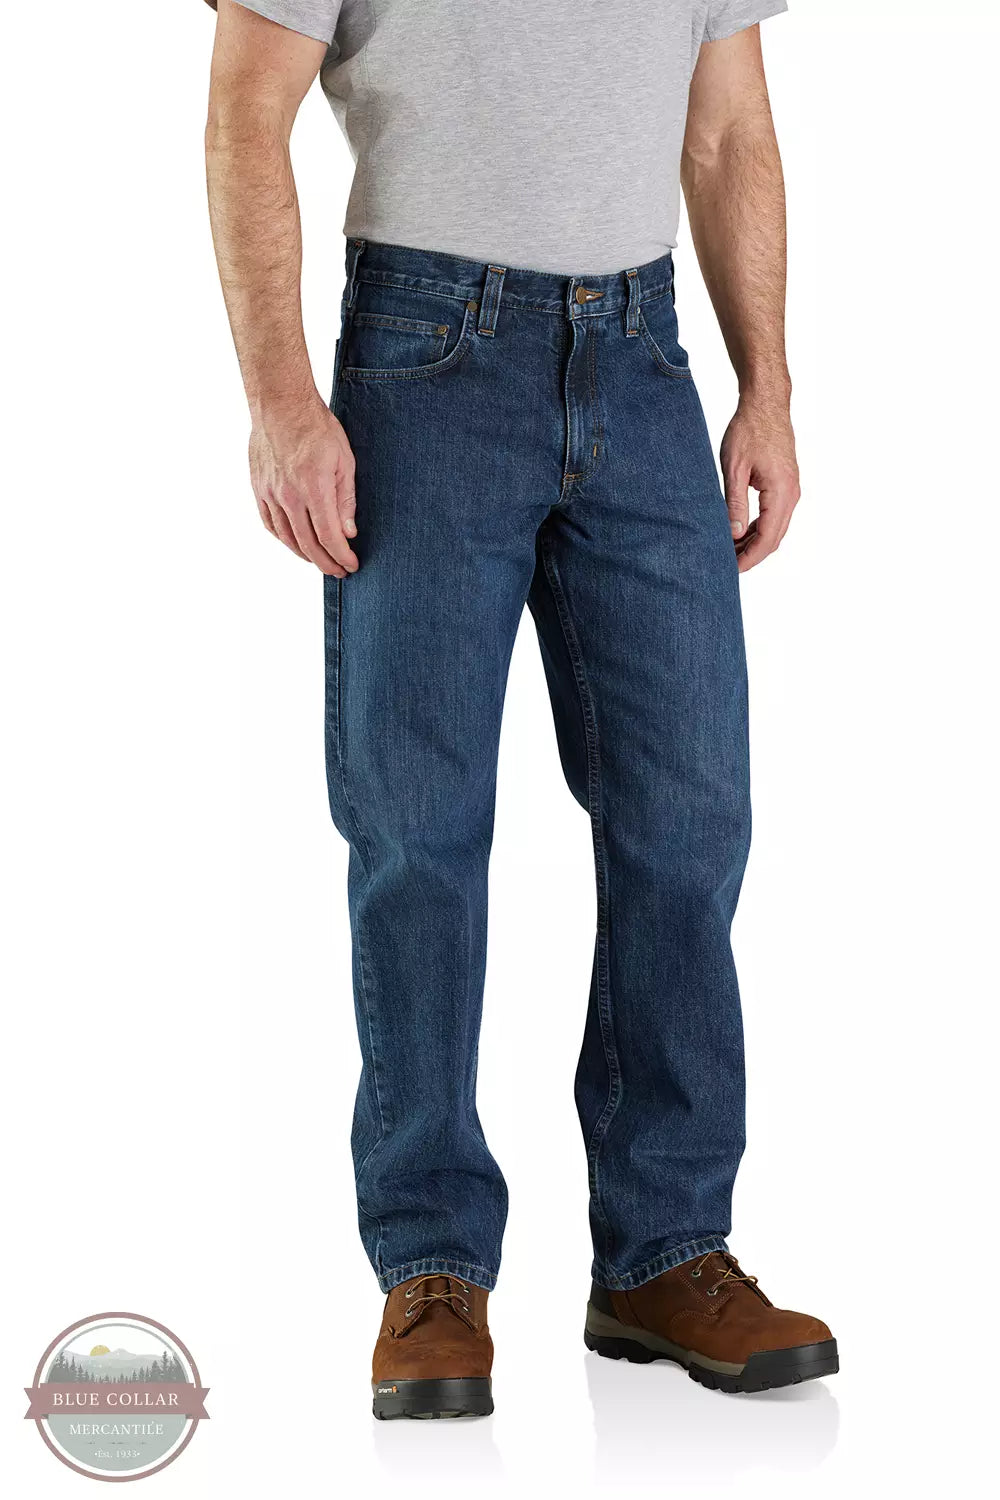 Carhartt 105119-HA0 Relaxed Fit 5-Pocket Jeans in Bay Front View